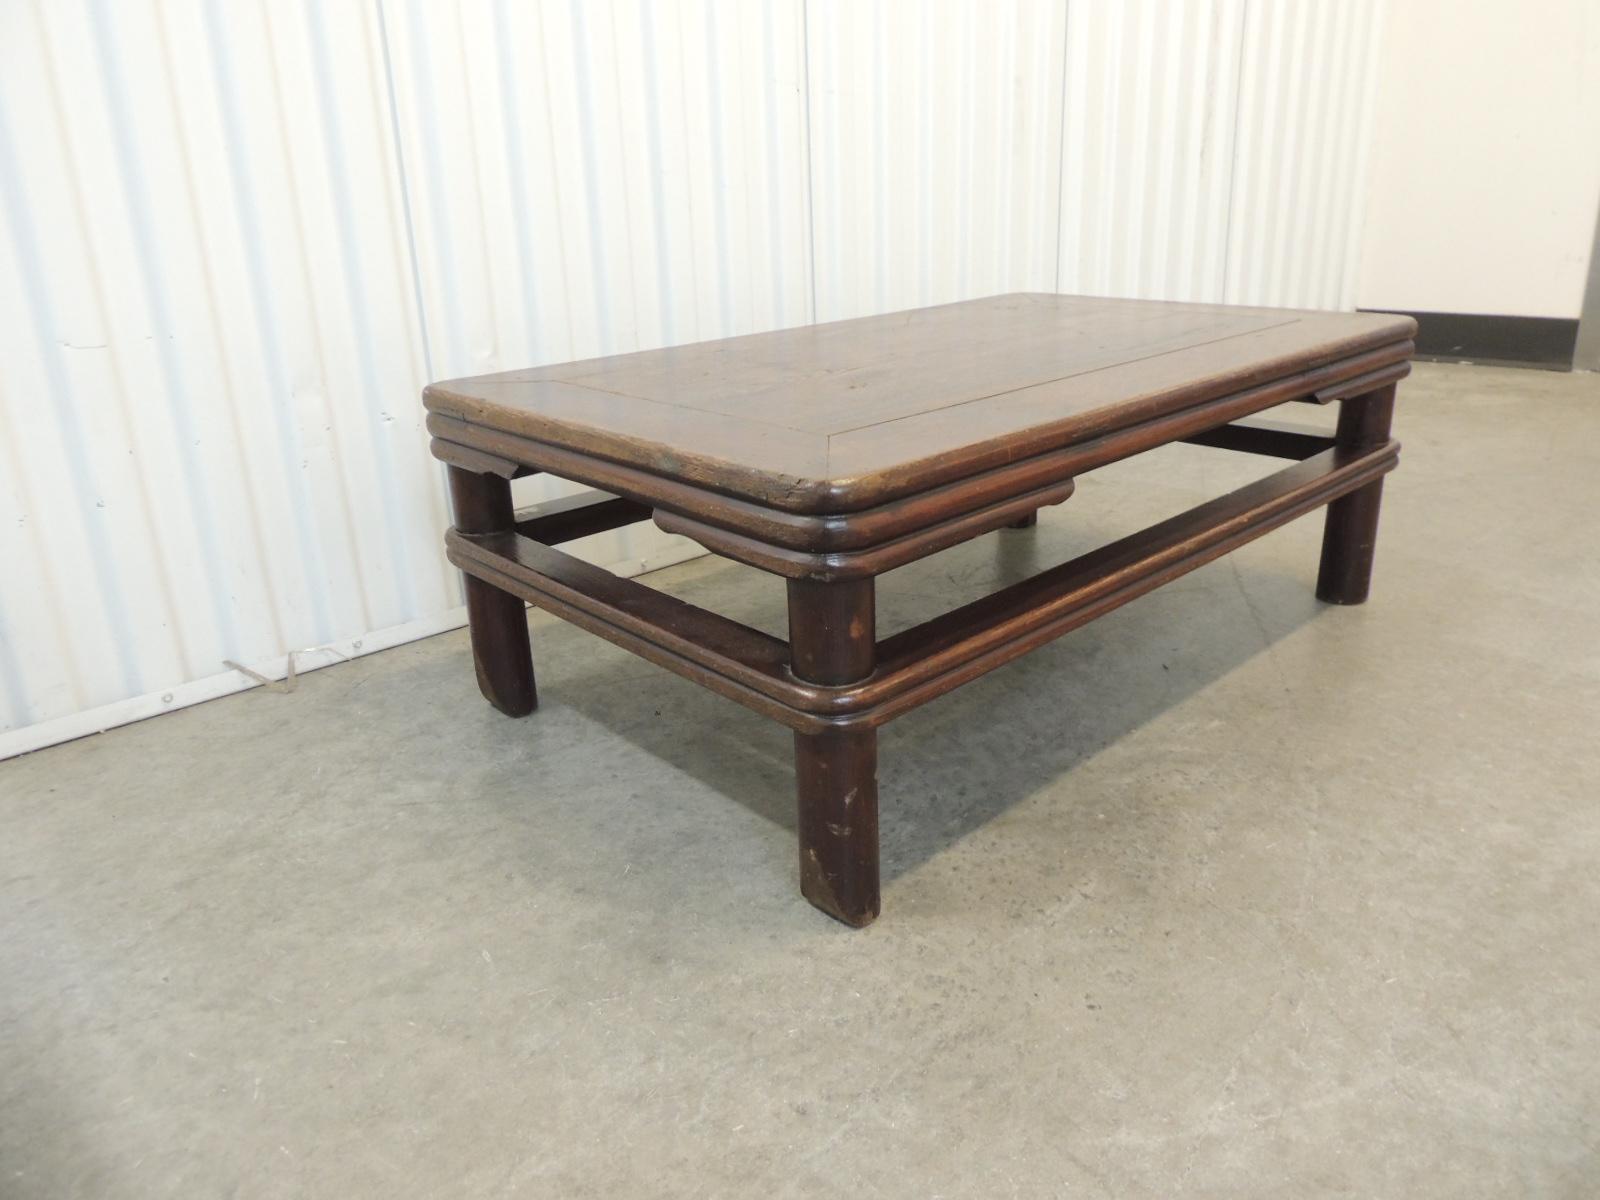 Antique Asian low tea table
Coffee table with rounded edges and legs.
(Darker color in person)
Size: 18.75” D x 31” W x 11.25” H.